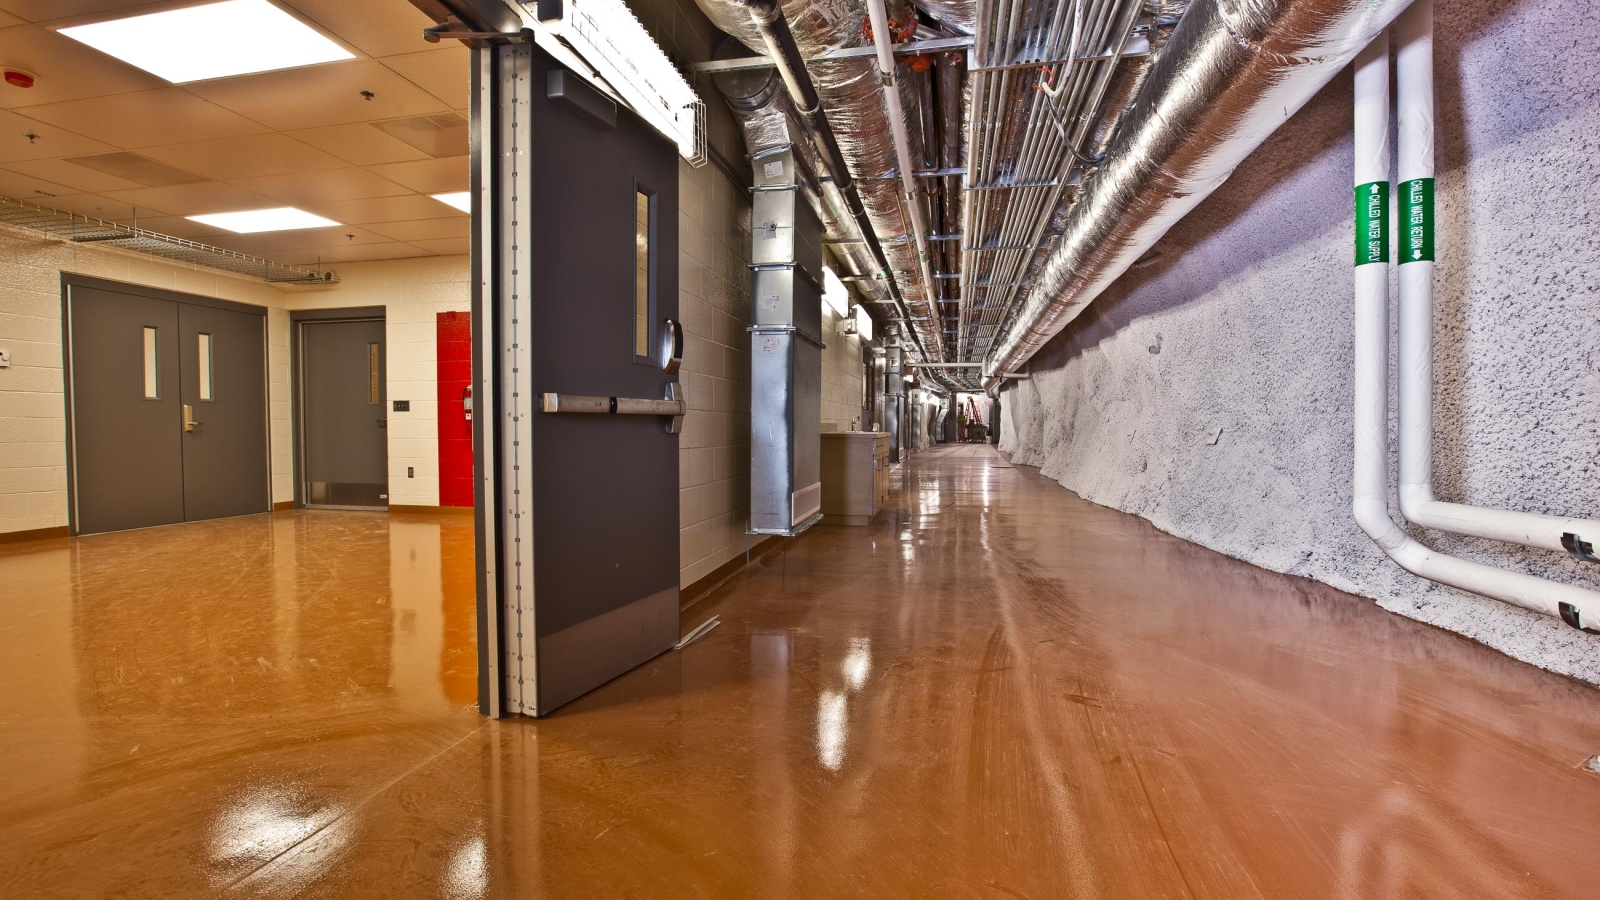 The floor of this corridor is covered in epoxy.